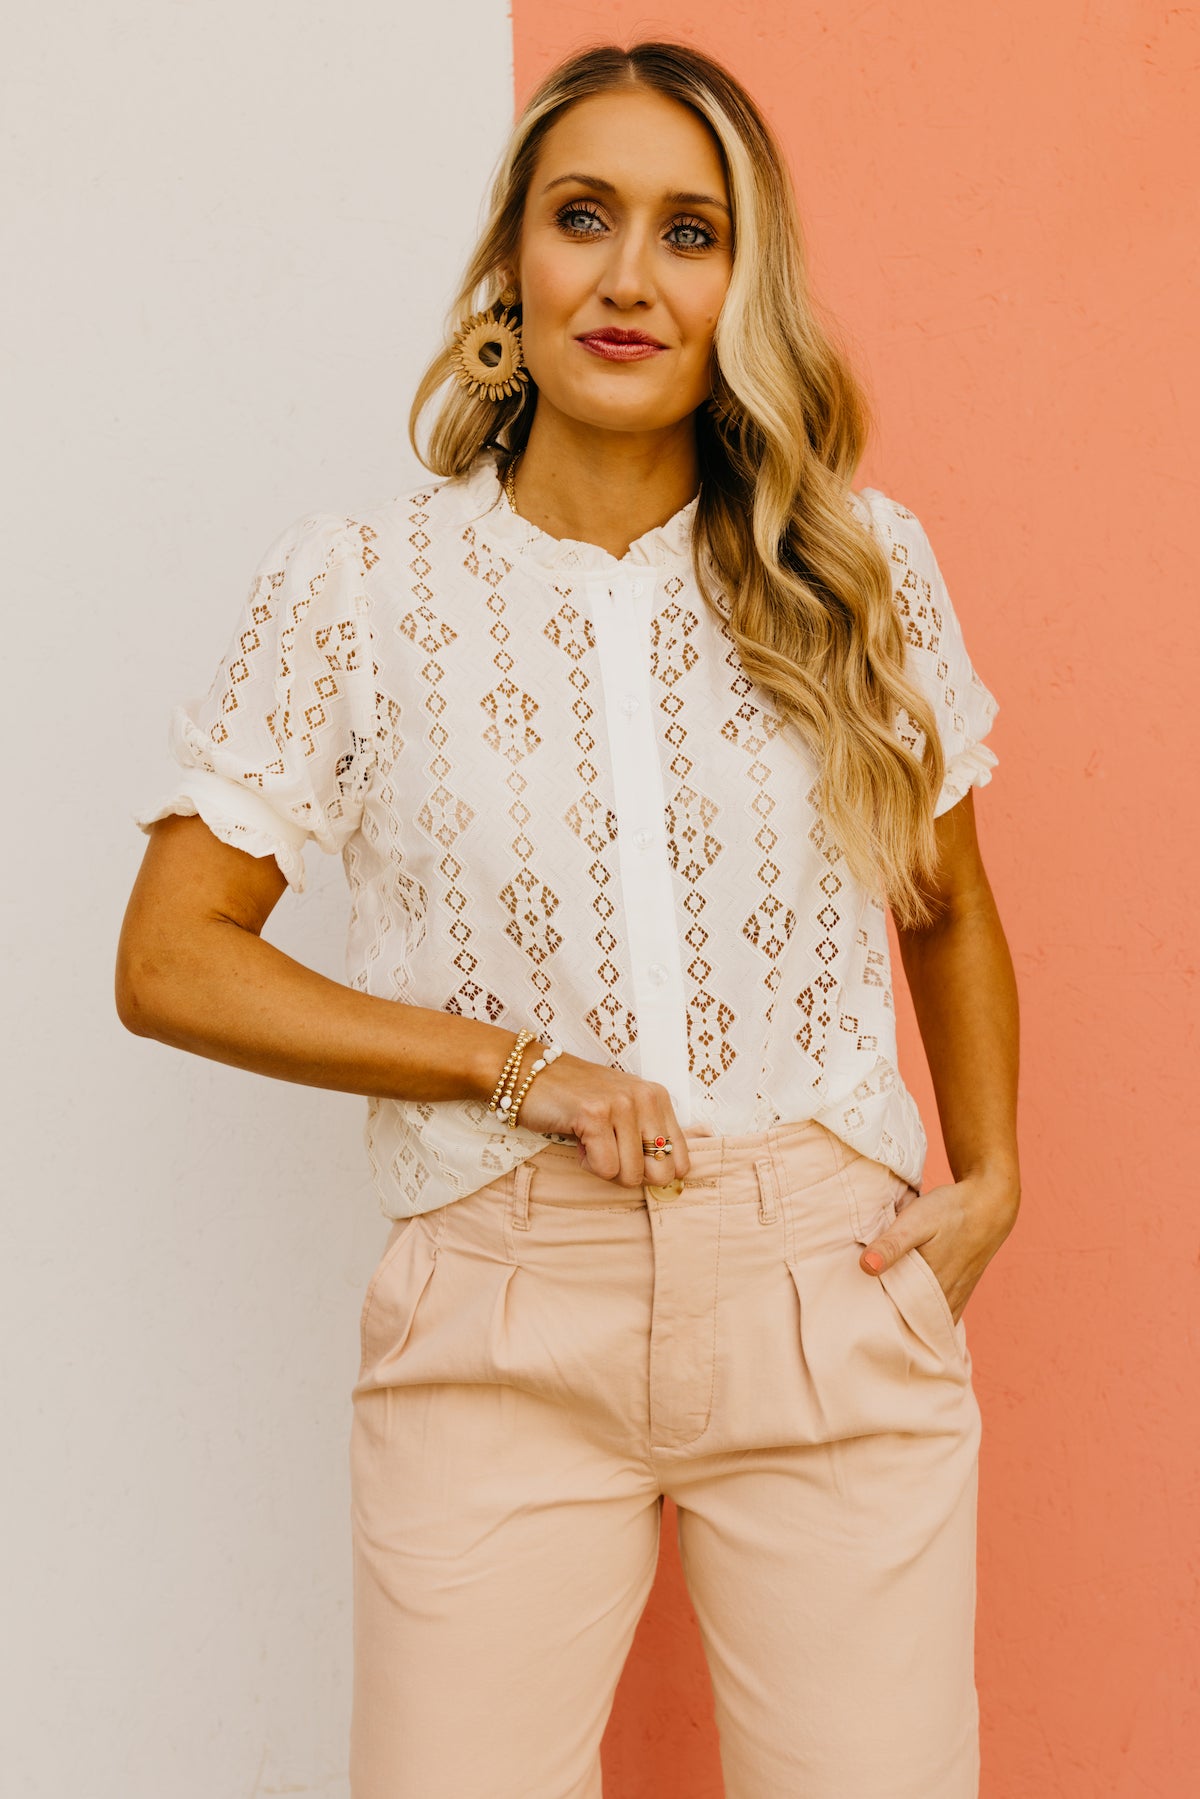 The Noel Button Down Eyelet Shirt Blouse